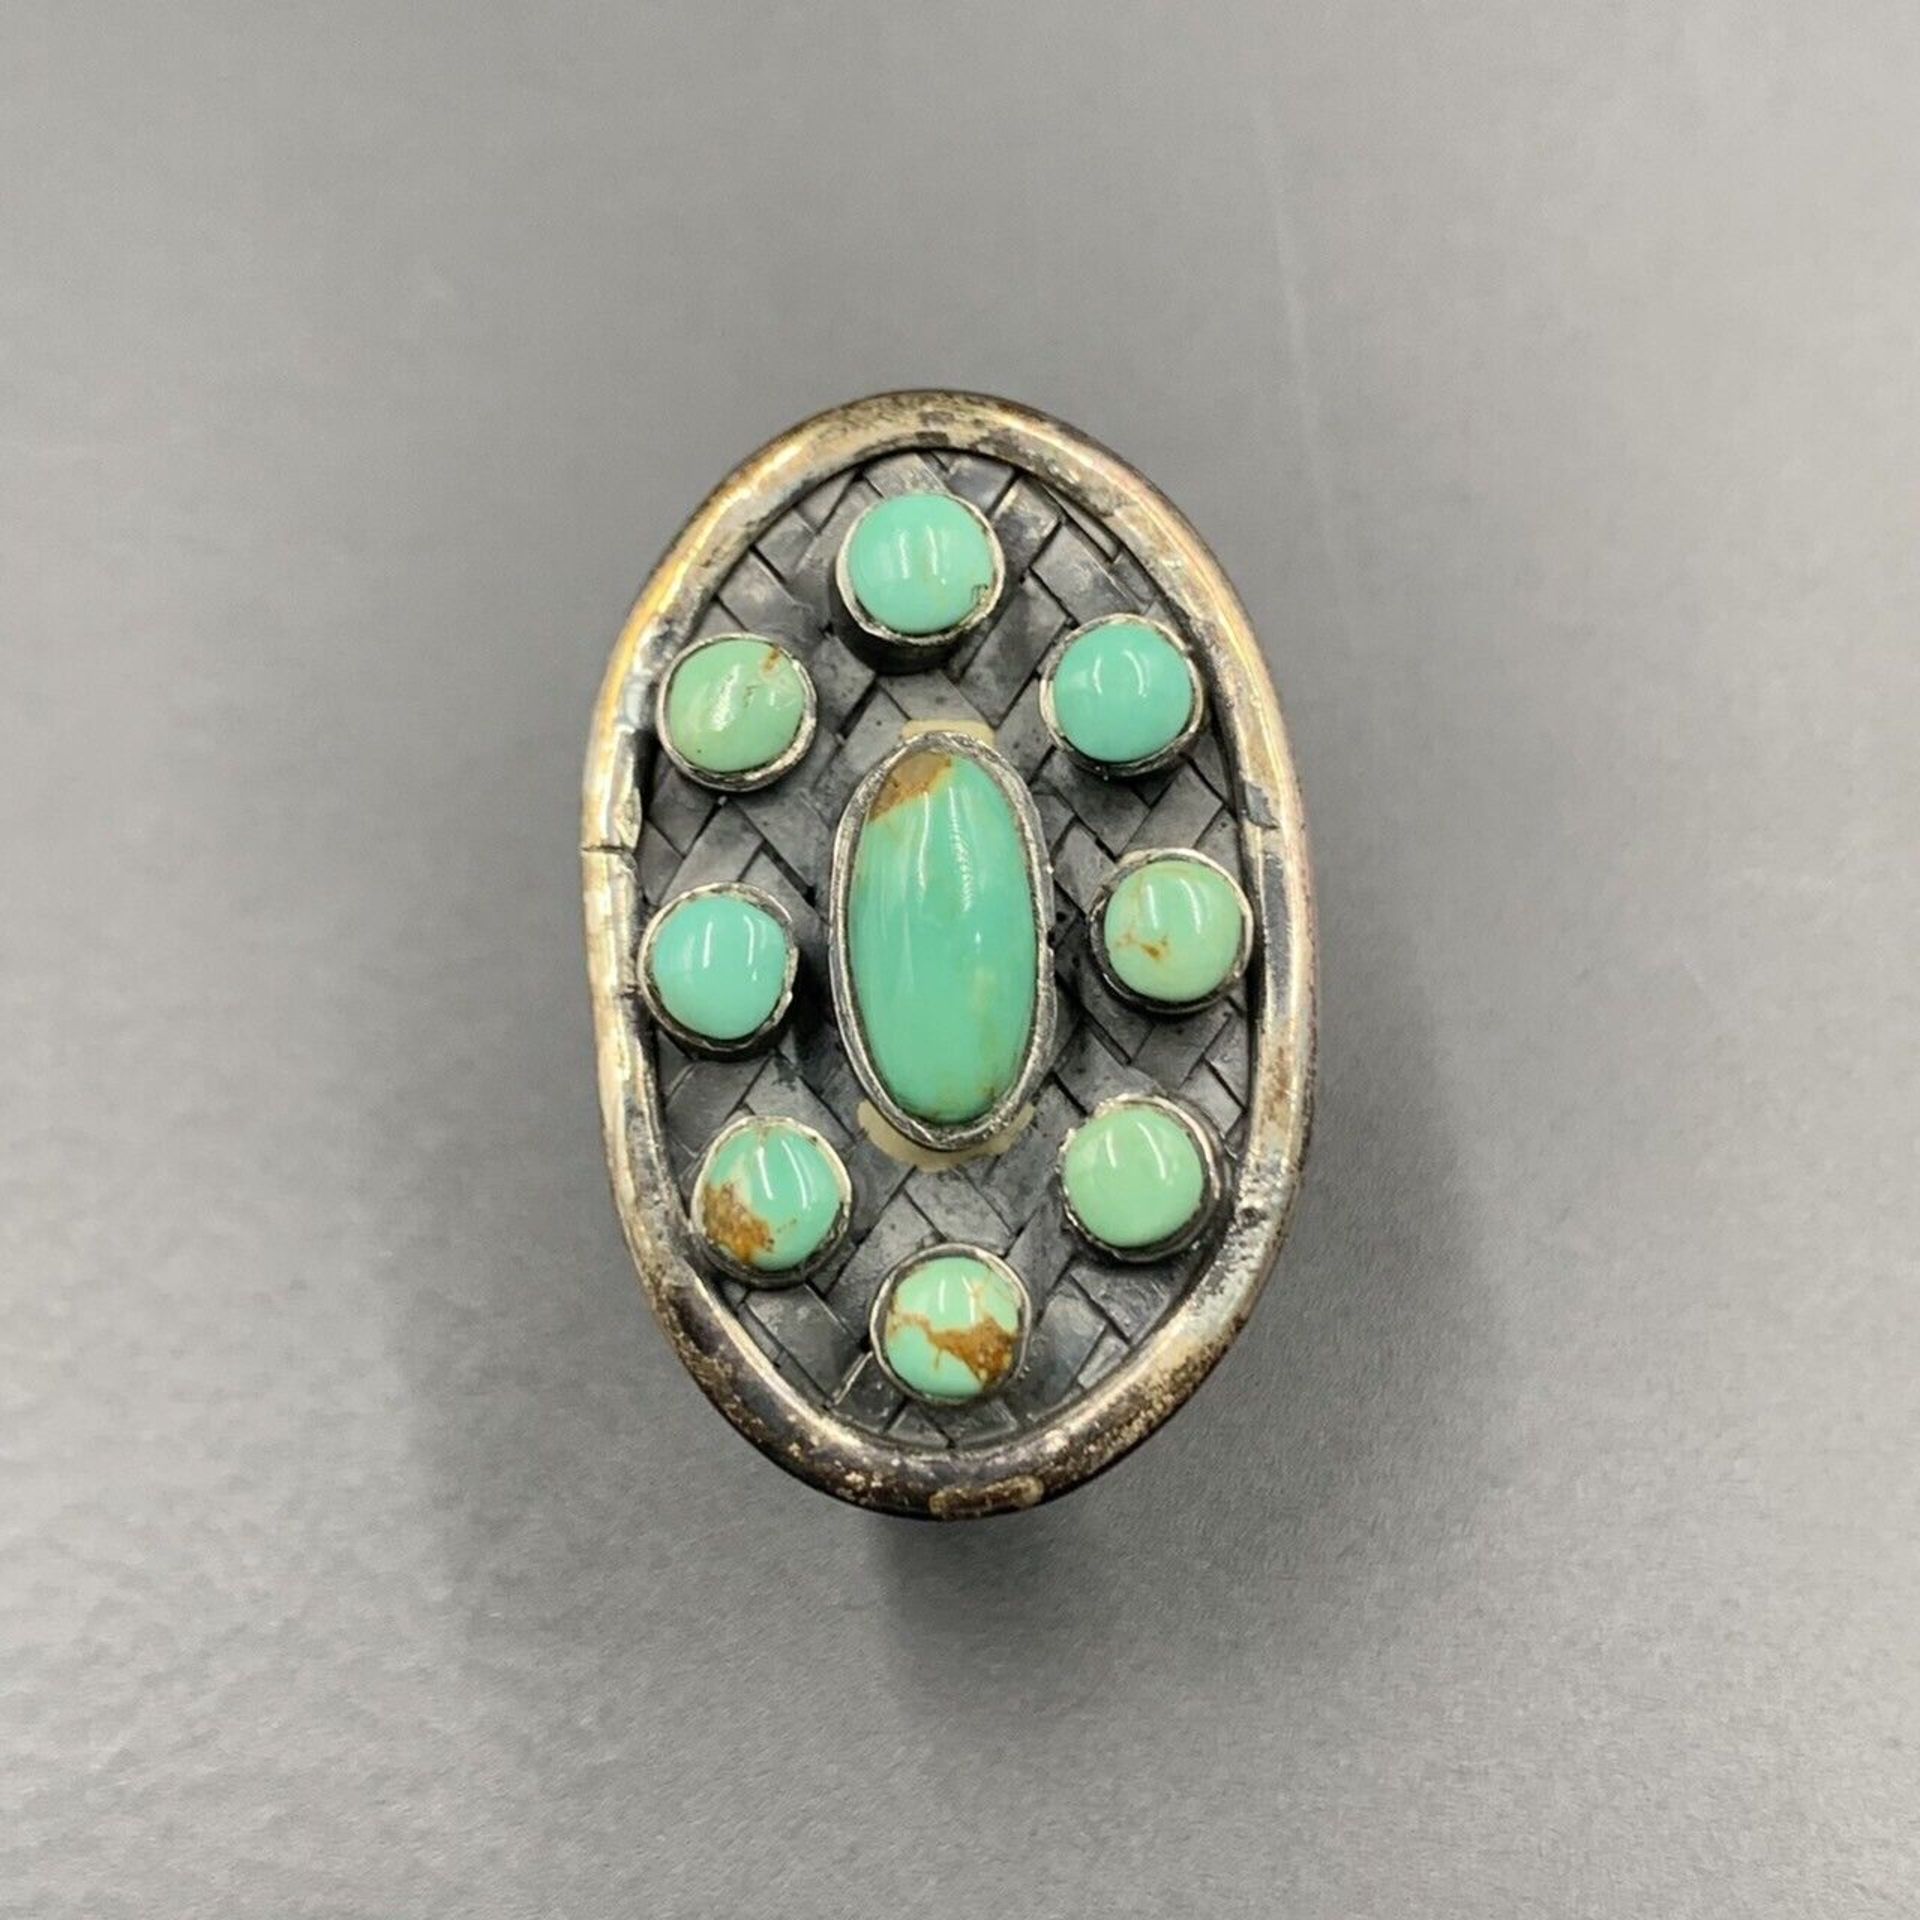 Handmade Natural Thai Made Turquoise With Silver Ring, Native American Inspired Ring. - Image 4 of 5